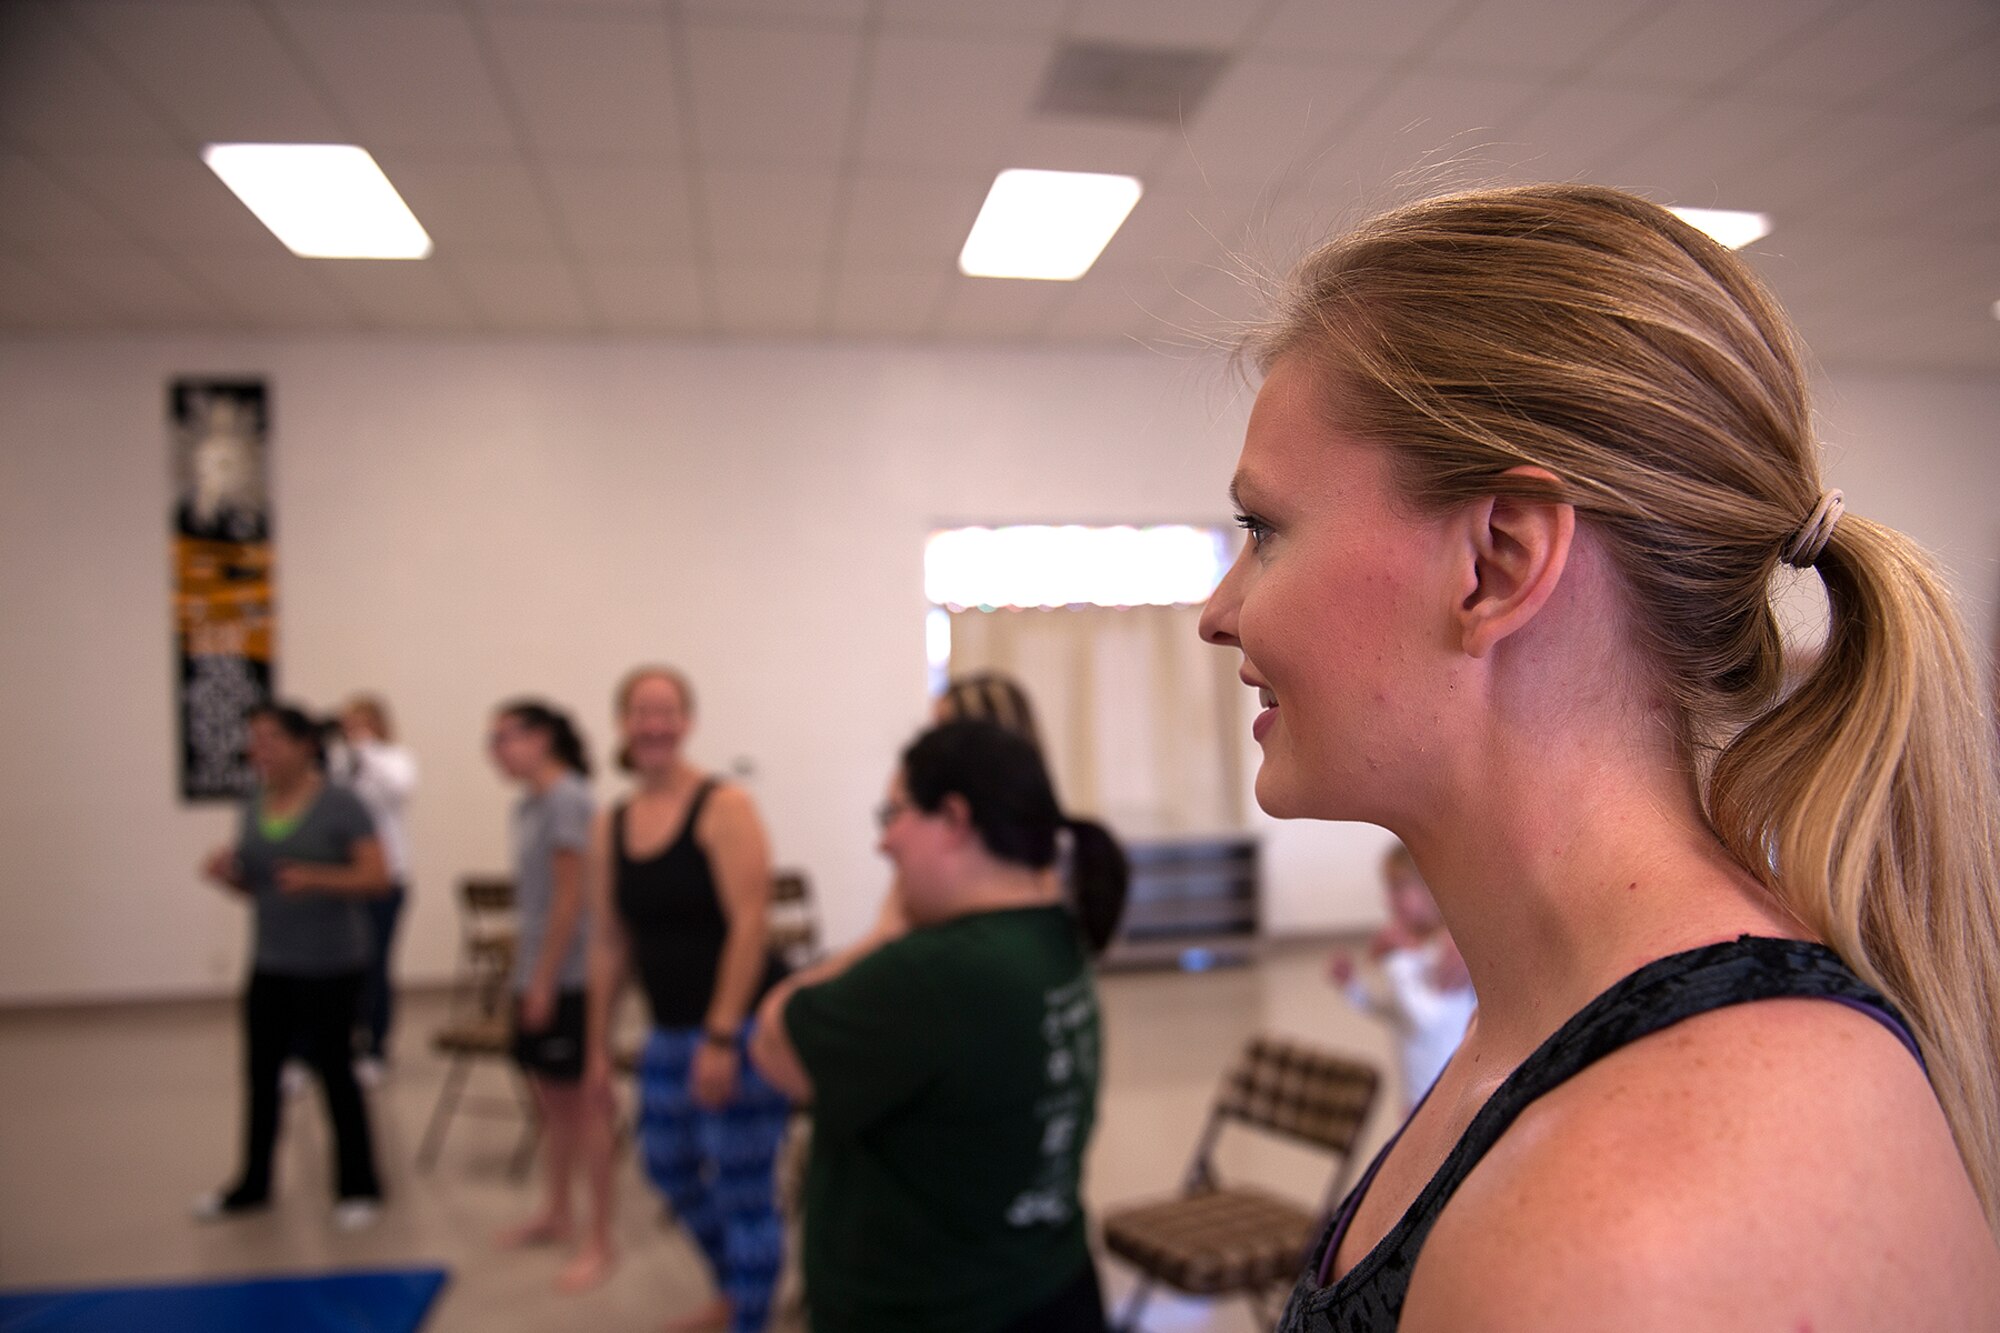 U.S. Air Force Staff Sgt. Adriene Anderson, 315th Training Squadron instructor, grins during a self-defense class at St. Marks Presbyterian Church, San Angelo, Texas, Feb. 27, 2016. Anderson initiated the Mommy Fit Camp program in August of 2015 as part of the Make Goodfellow Great Initiative for Goodfellow Air Force Base. (U.S. Air Force photo by Airman 1st Class Caelynn Ferguson/Released)